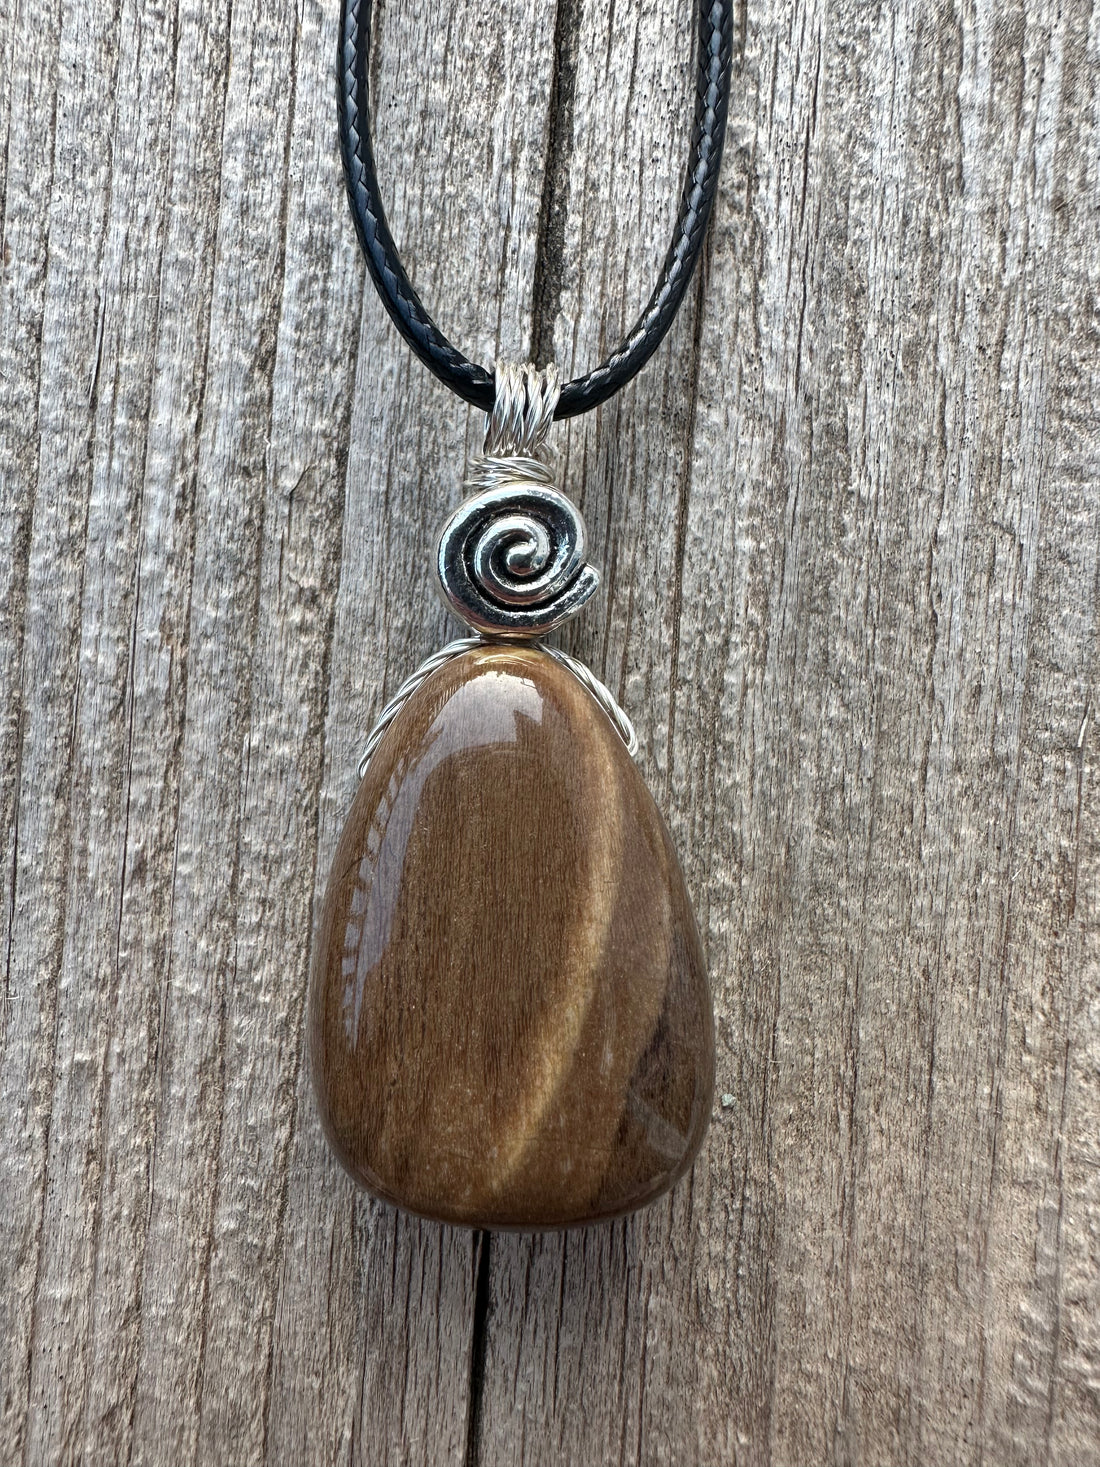 Petrified Wood Necklace for Transformation and Releasing Negativity. Swirl Signifies Consciousness